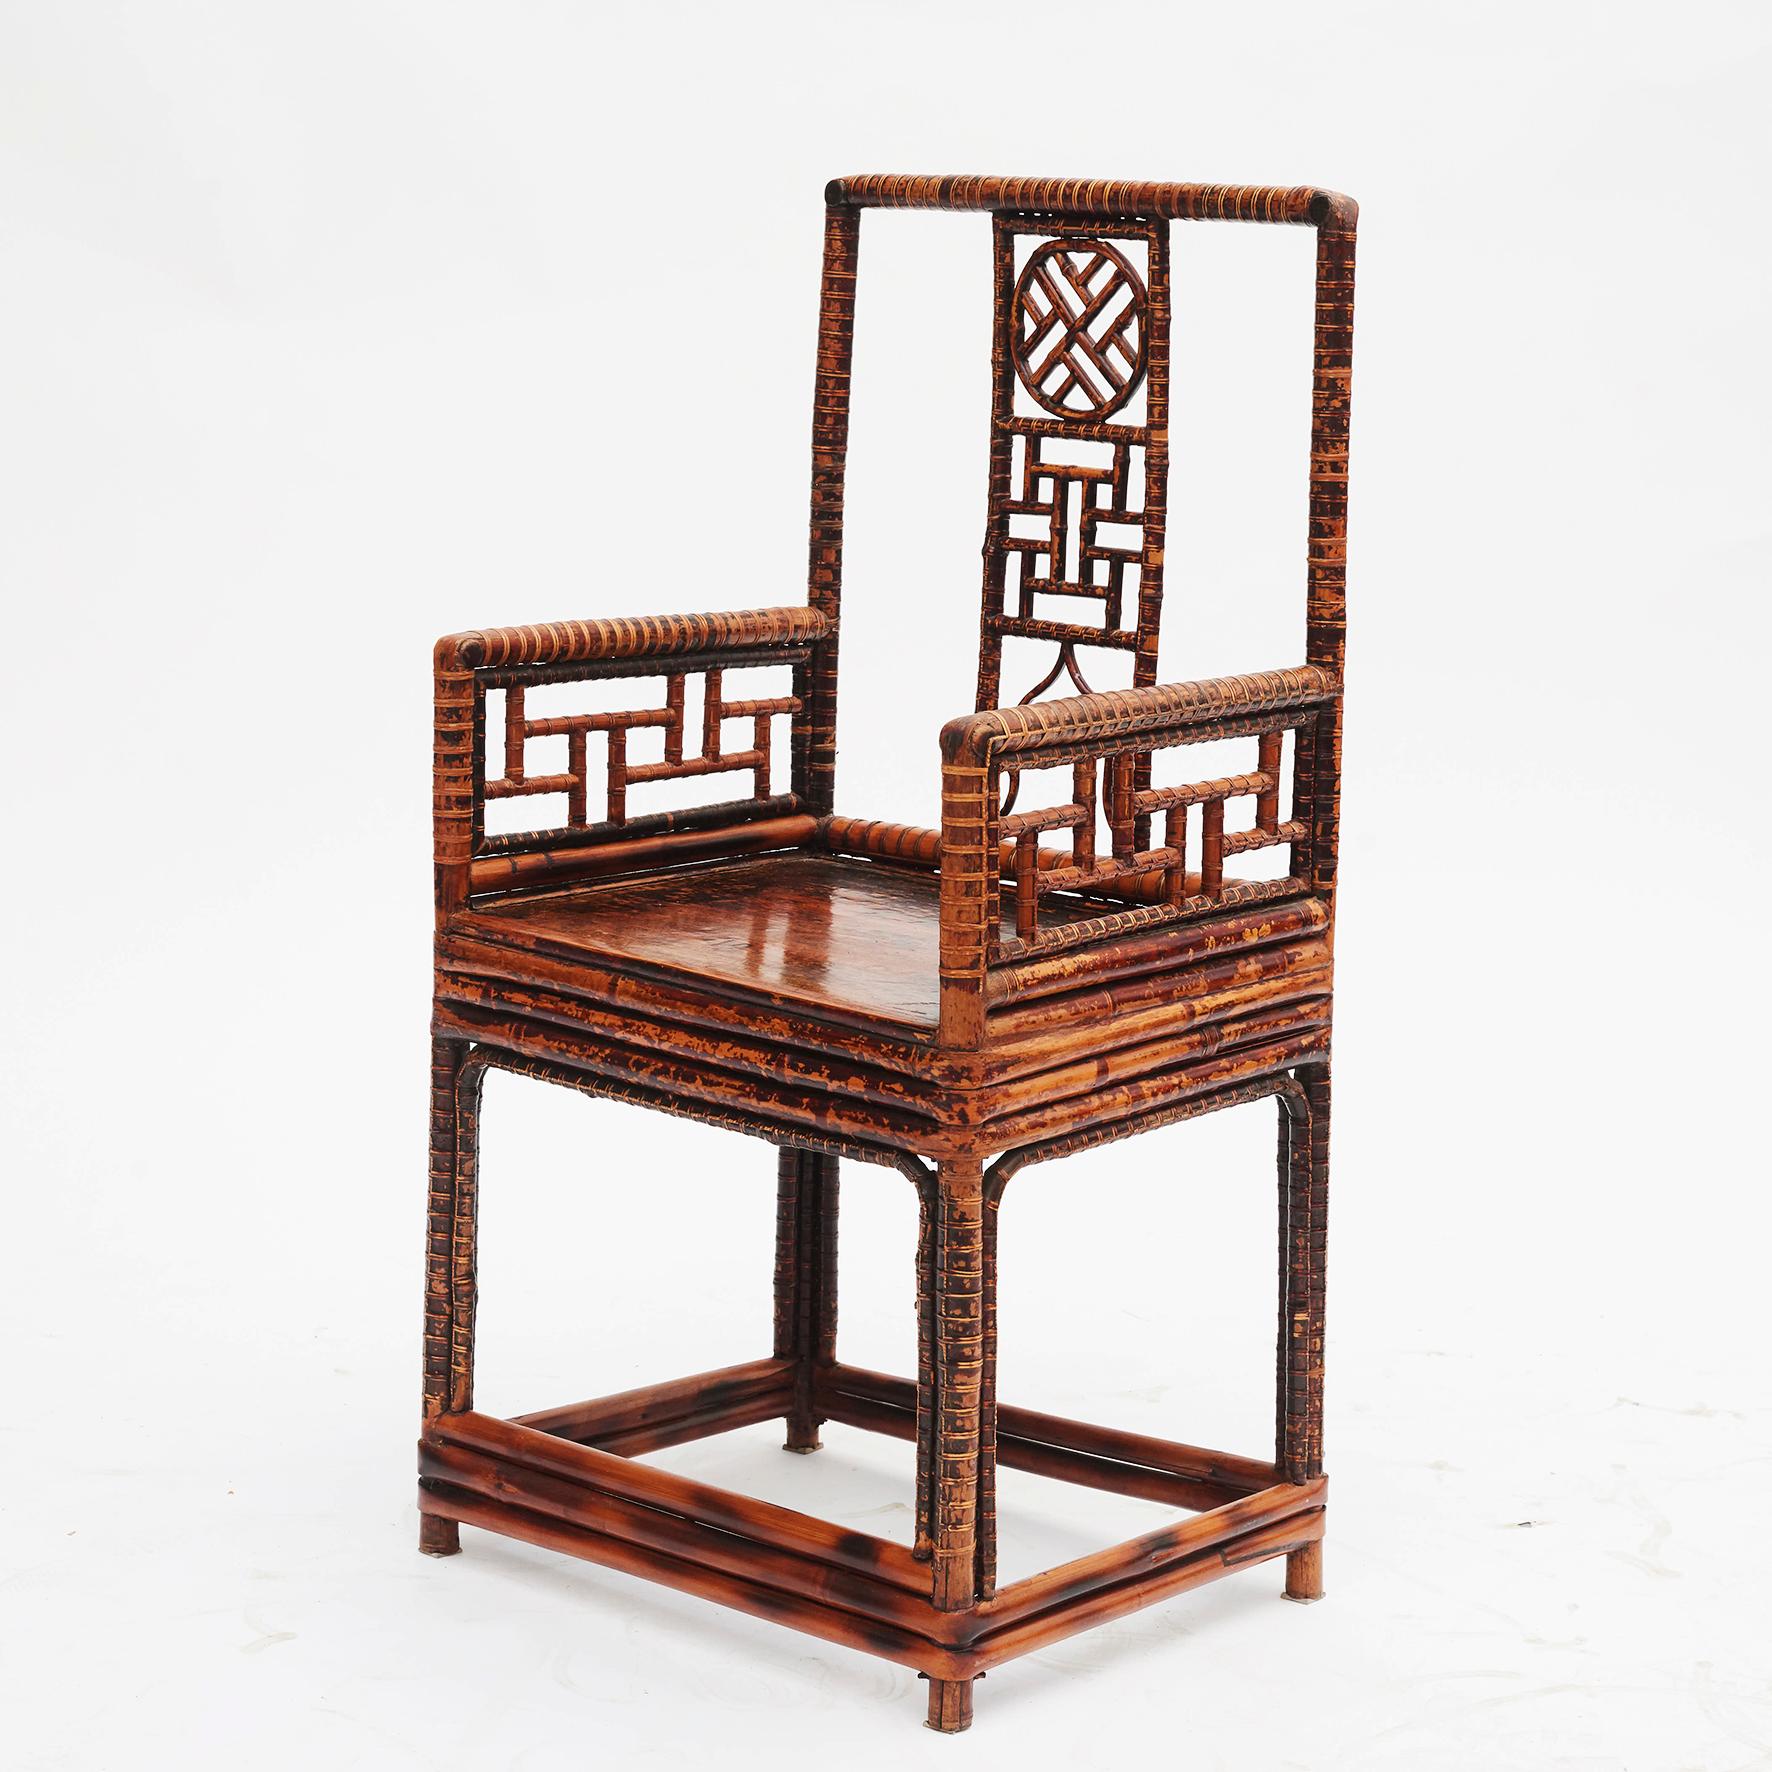 19th century Chinese bamboo armchair with a plain flat wooden seat.
China, circa 1840.
Good quality and craftsmanship.